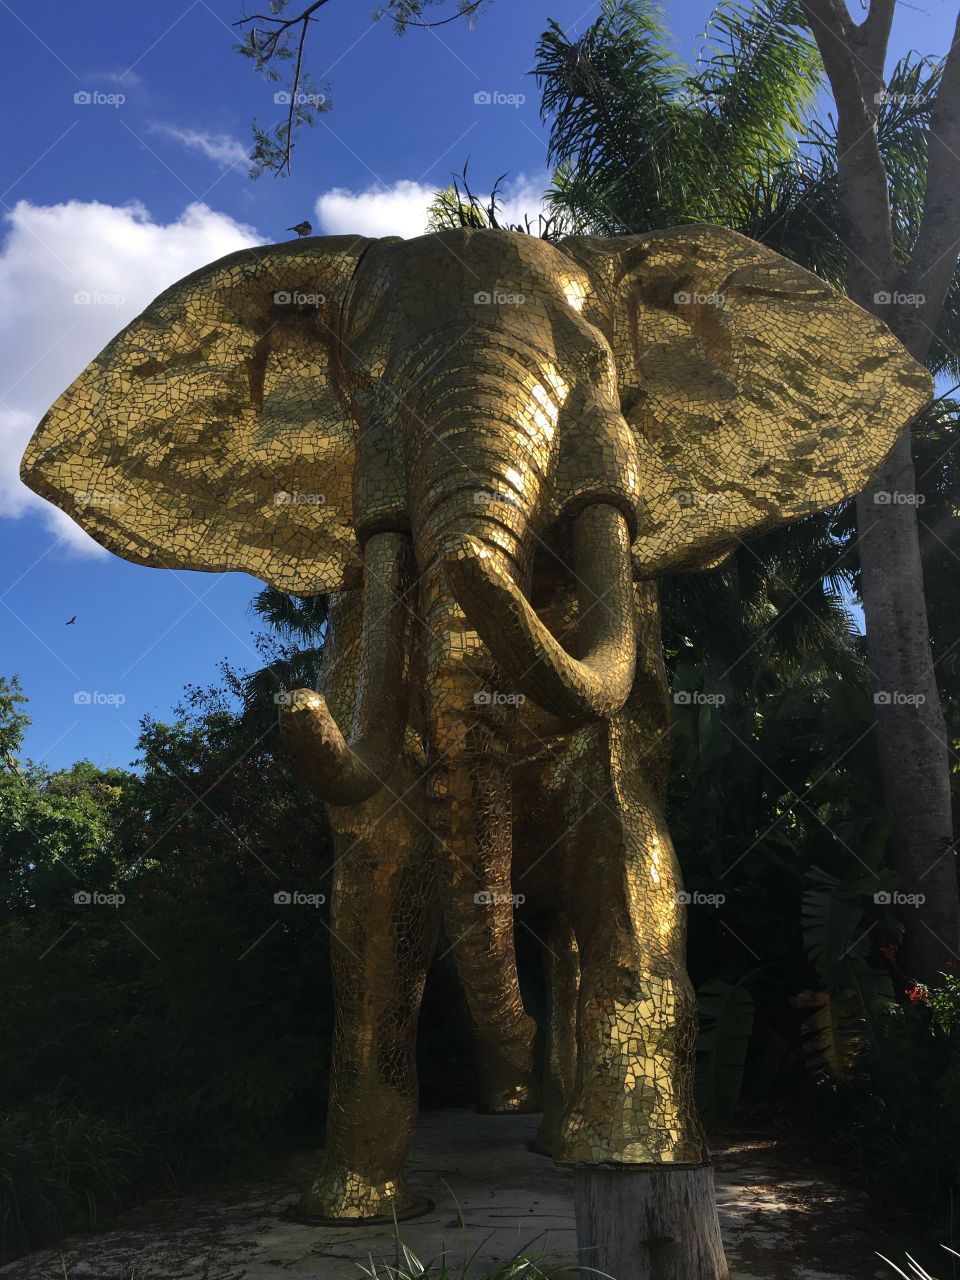 Majestic golden elephant statue from Miami Zoo